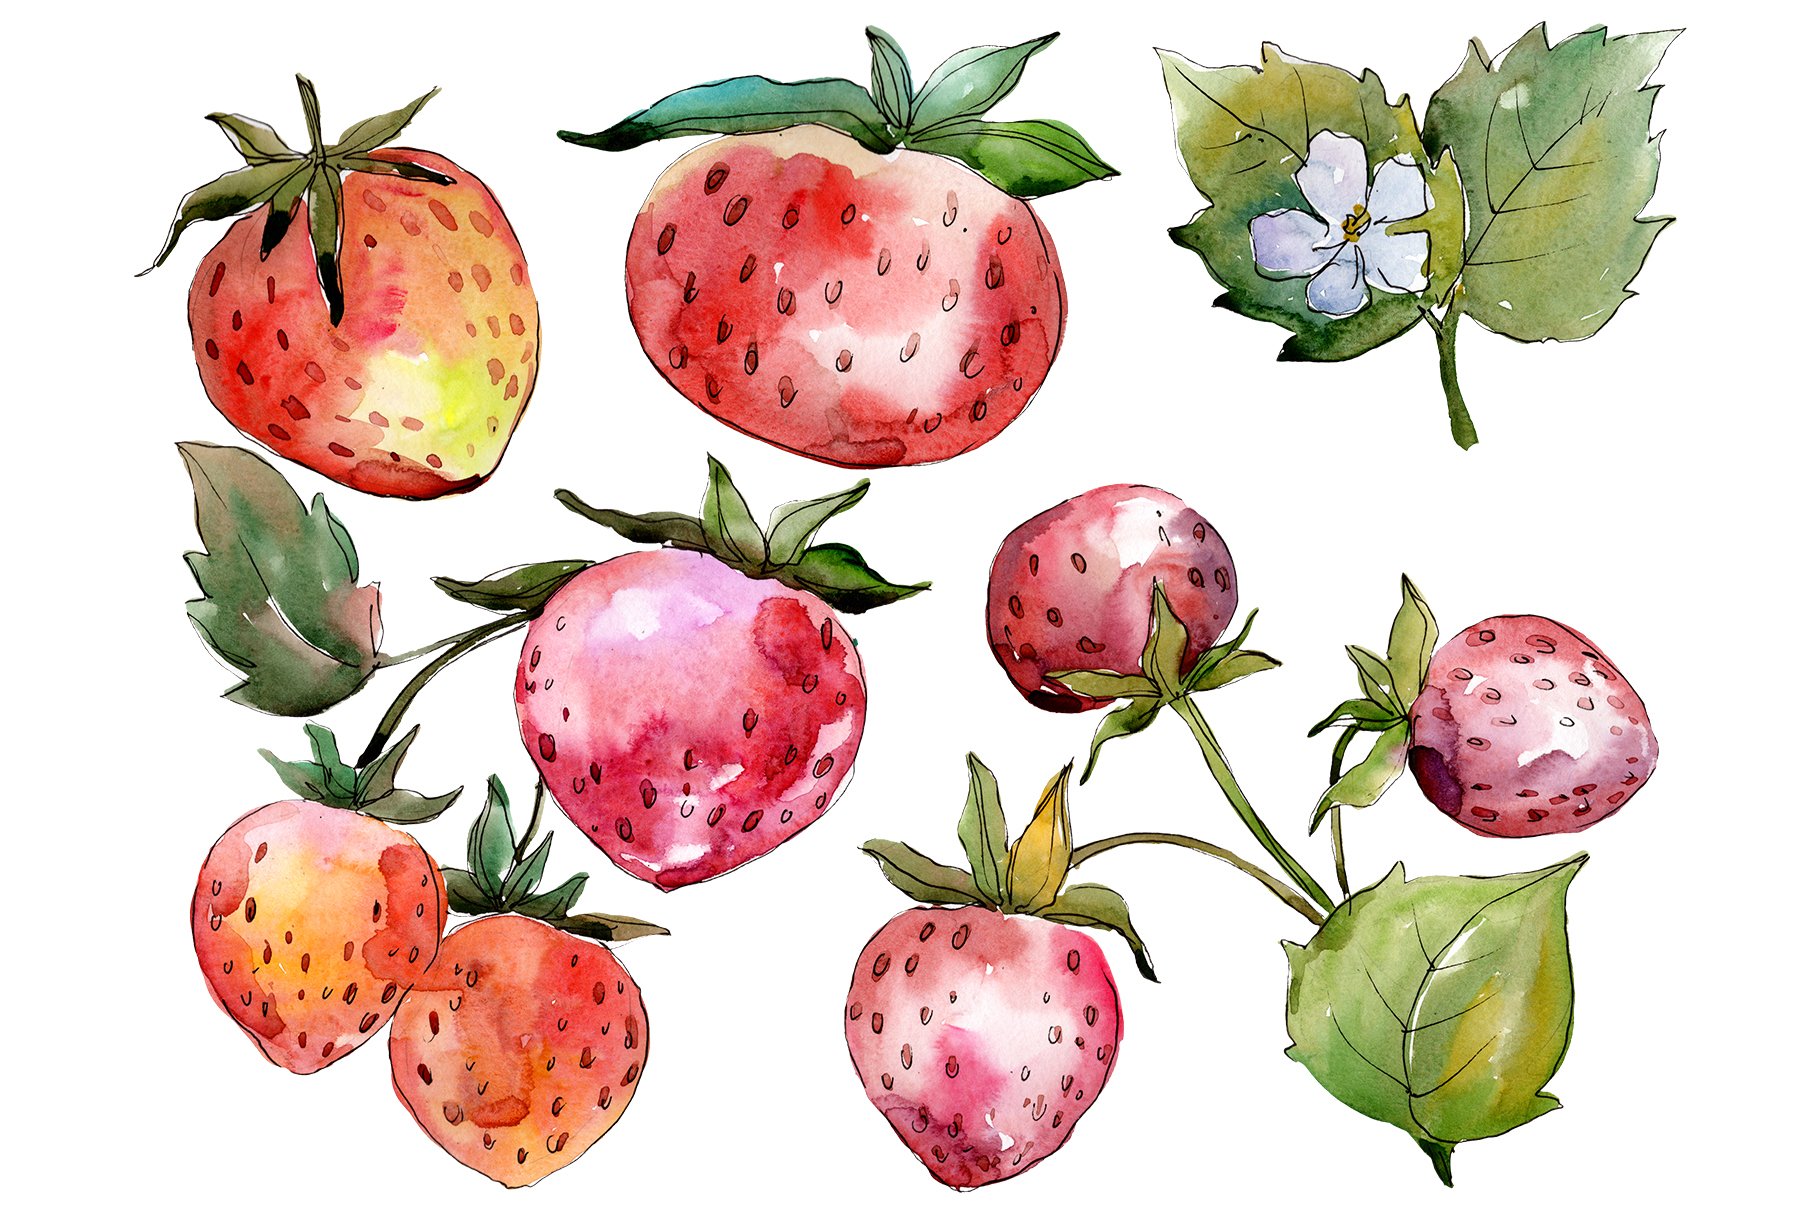 Cool and realistic strawberries illustrations.